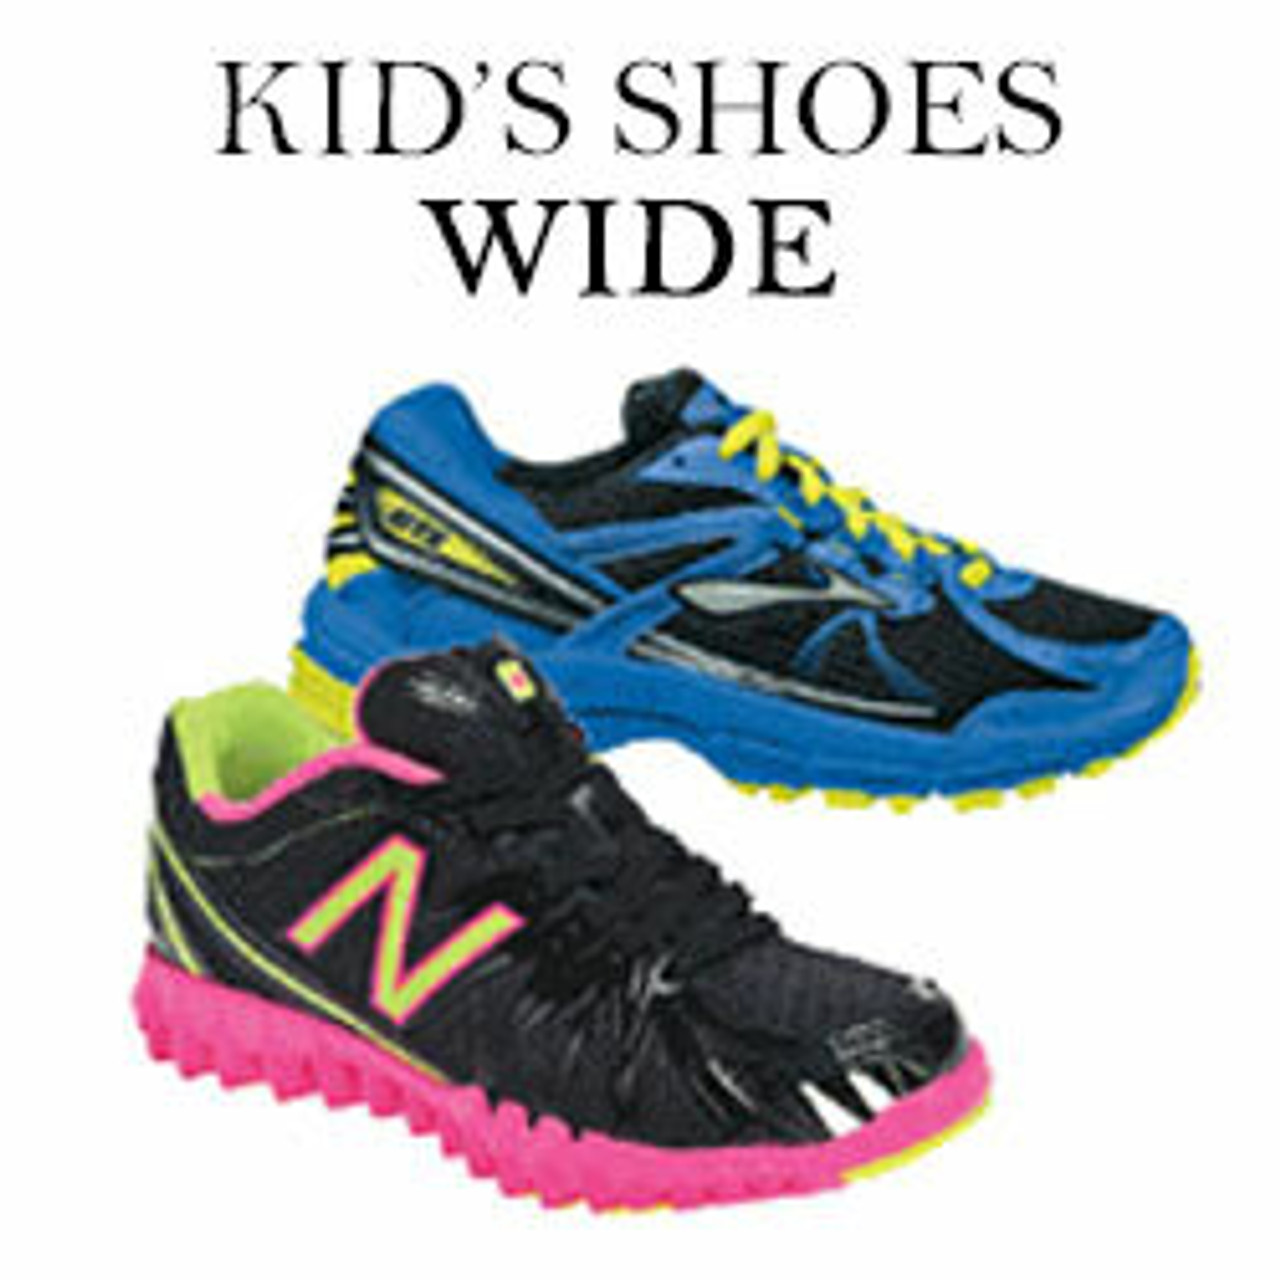 Children's Shoes For Wide Feet | Kids Wide Shoes